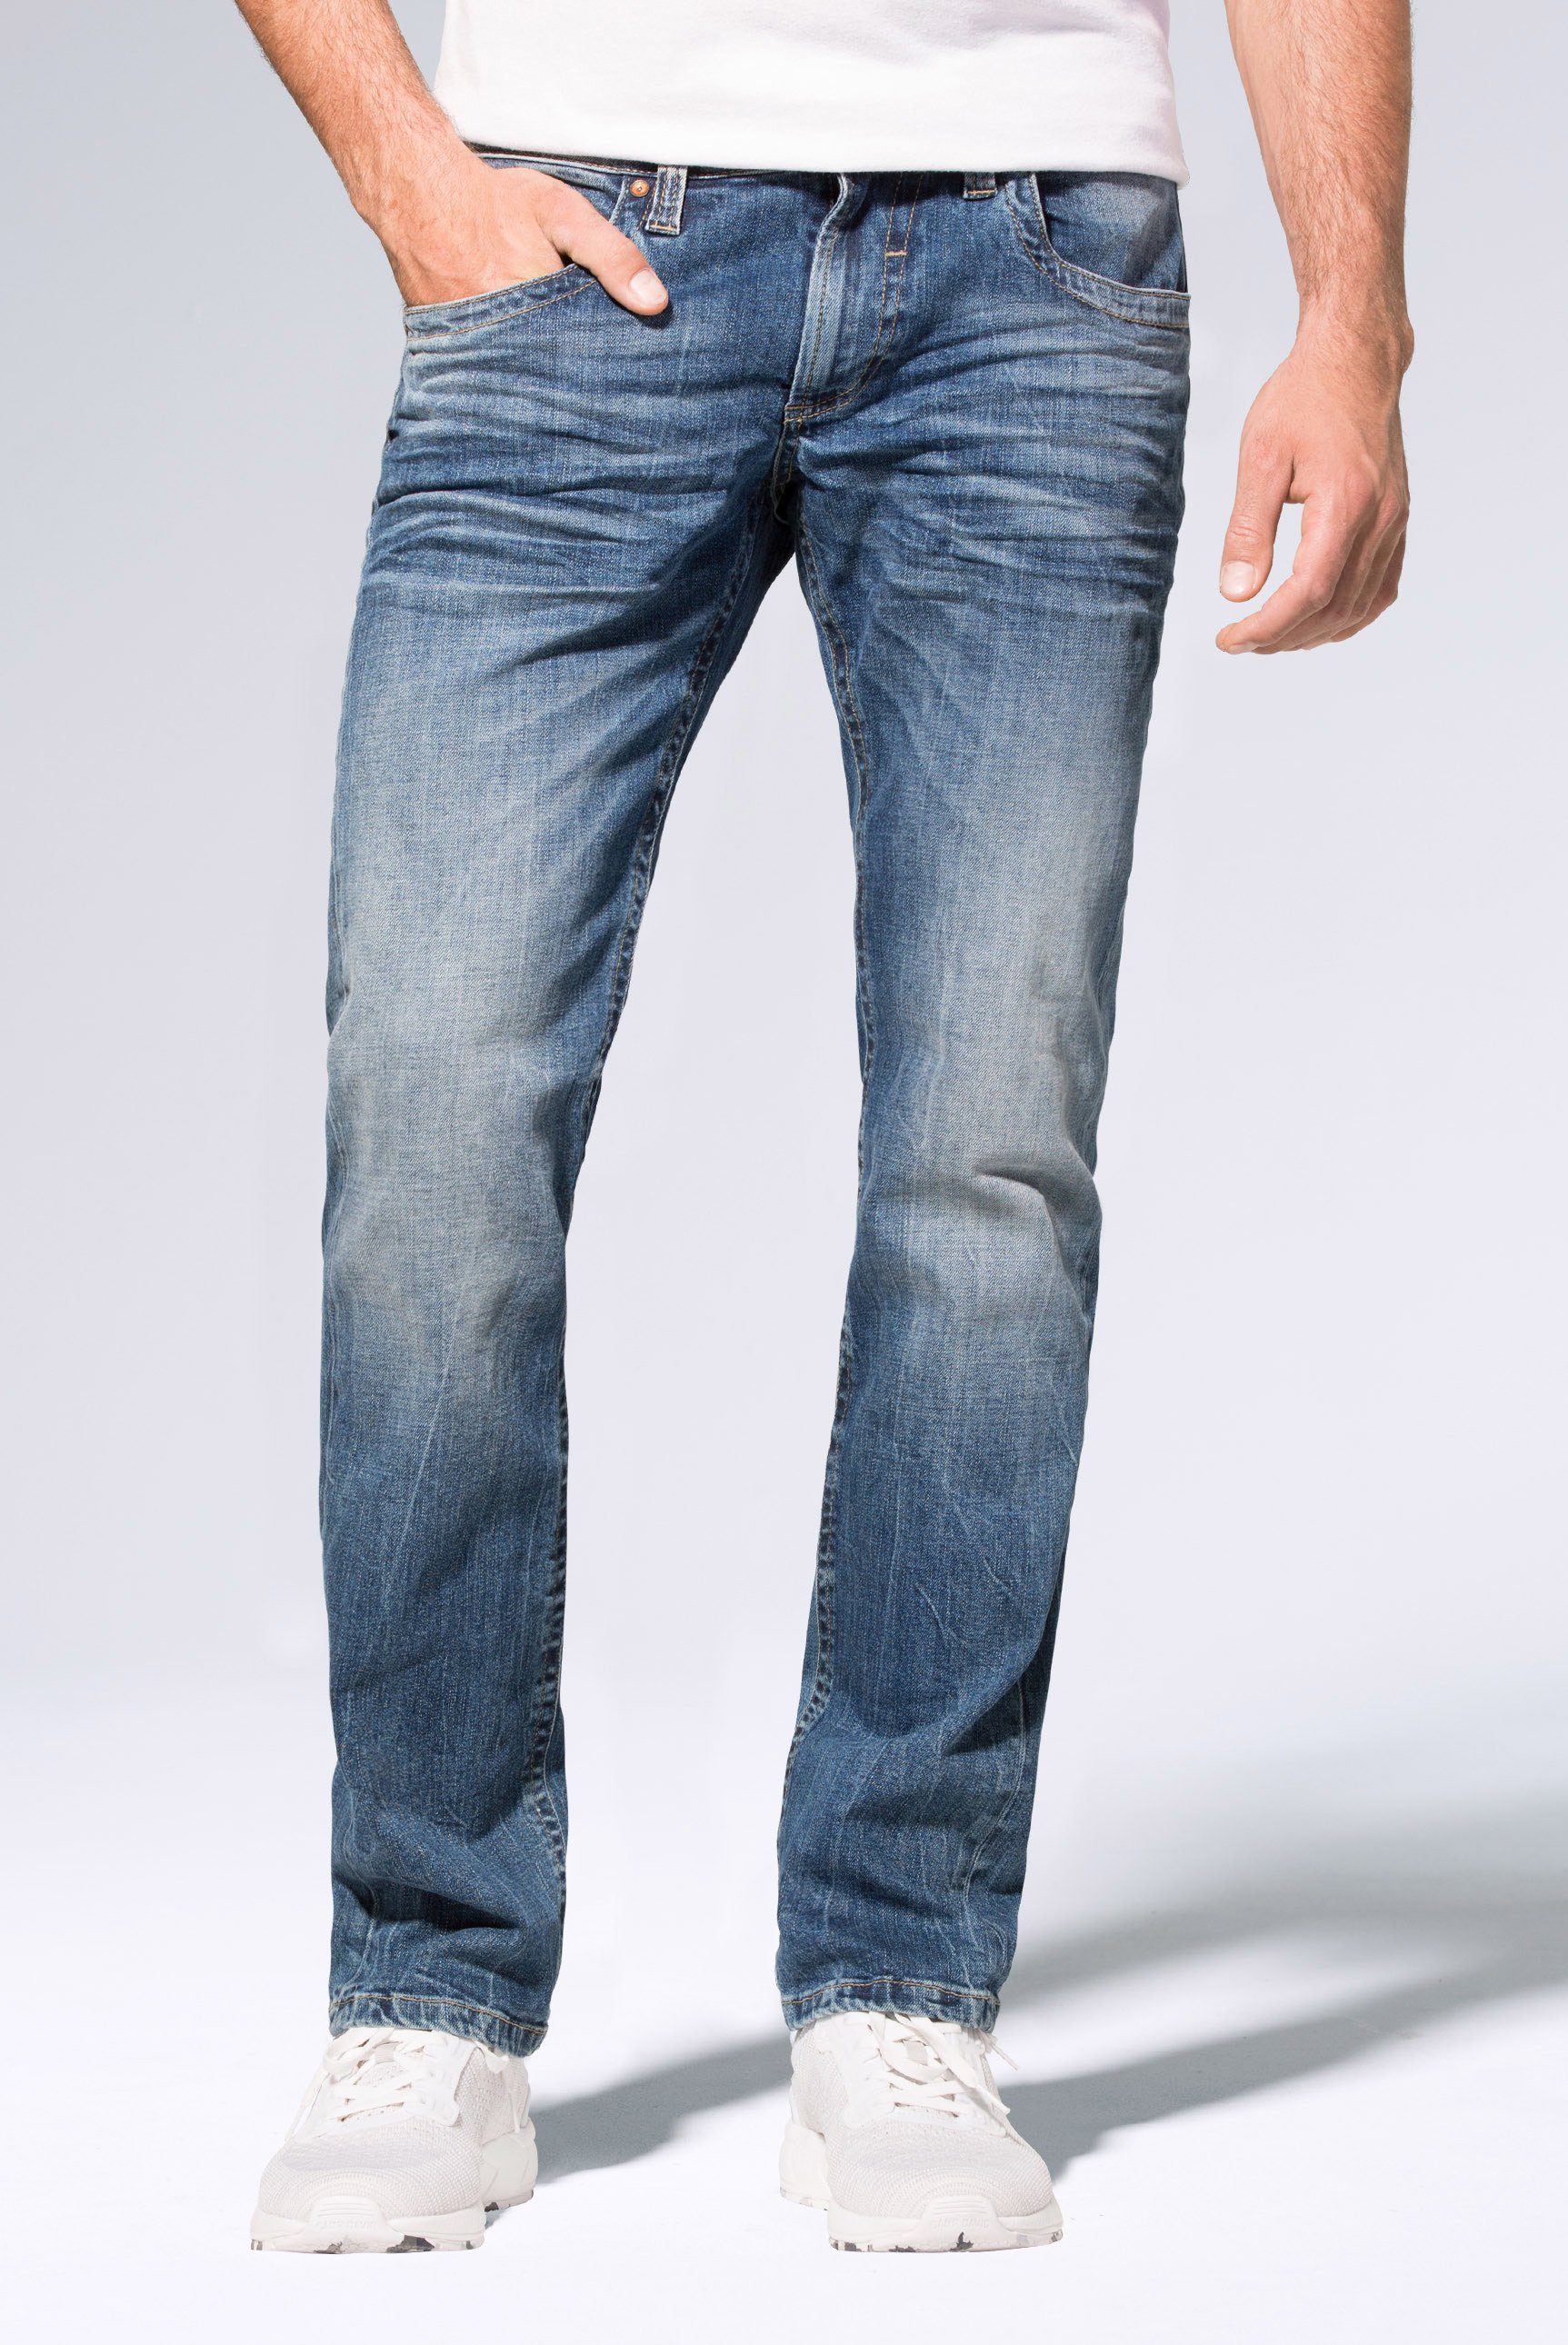 CAMP DAVID Regular-fit-Jeans »NI:CO« mit Used-Waschung online kaufen | OTTO